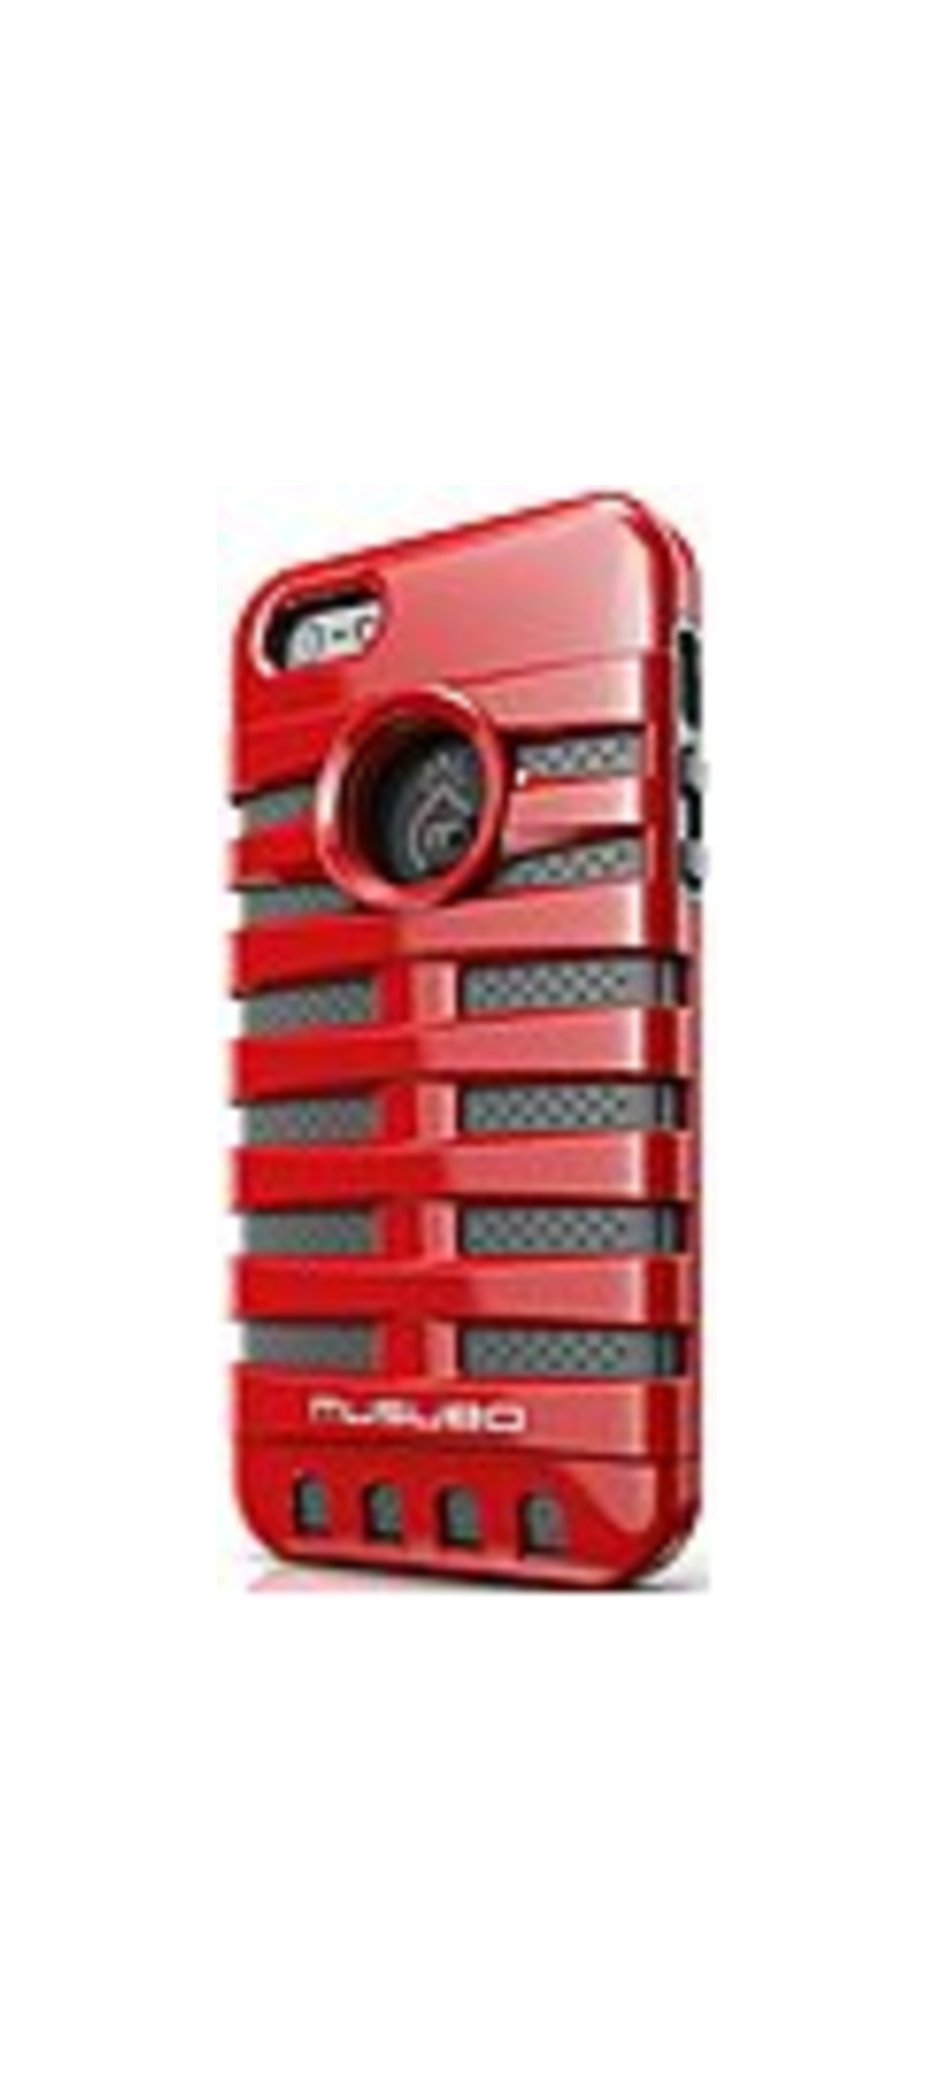 Smart IT Musubo Retro Case for iPhone 5 - For iPhone - Red - Silicone, Polycarbonate